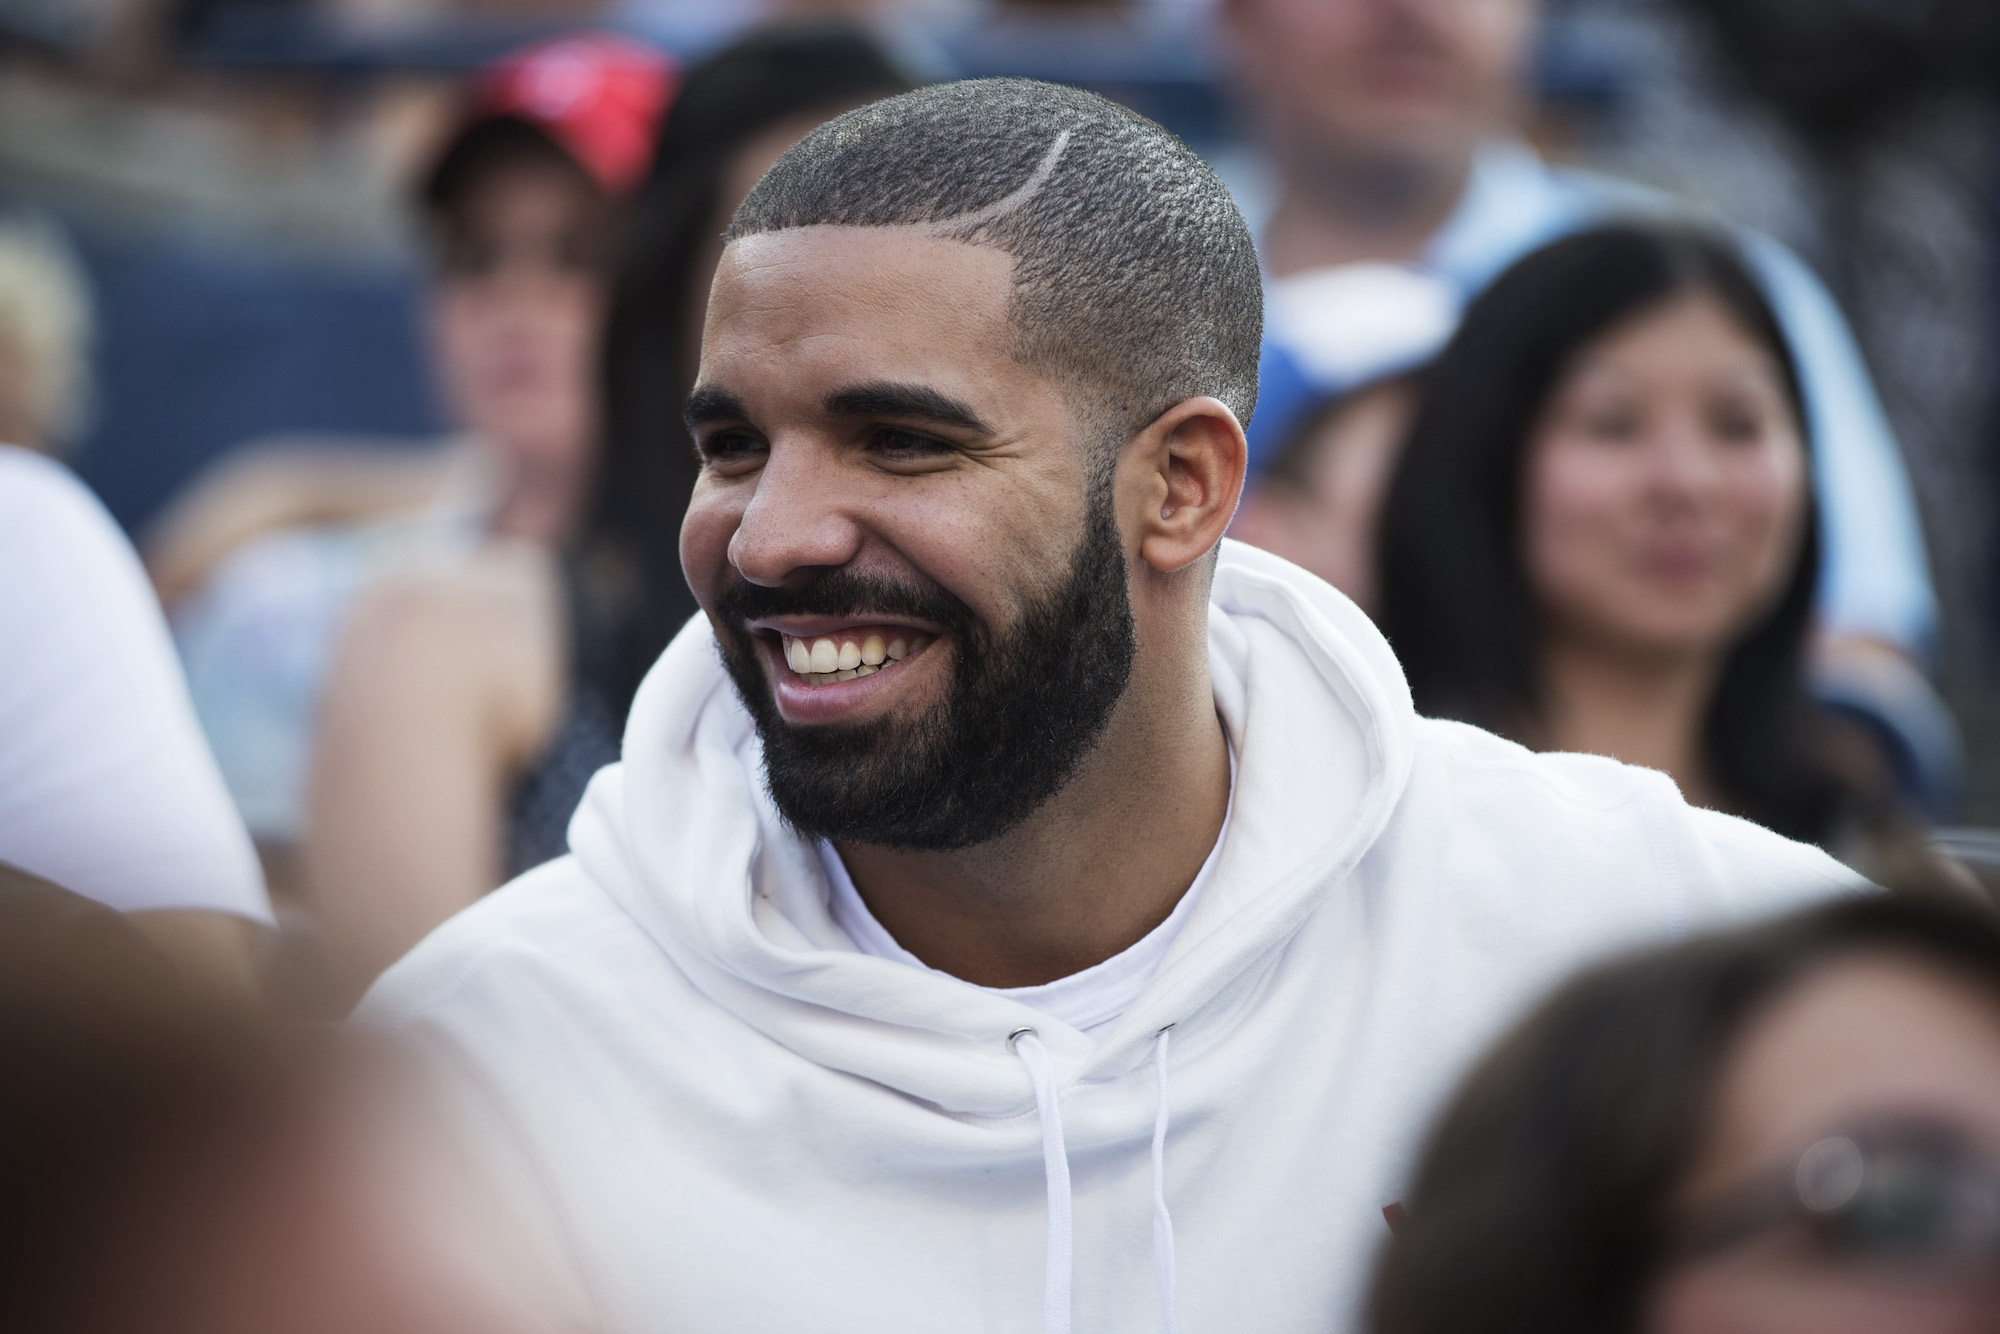 Drake, who was once linked to Serena Williams, smiling and wearing a white hoodie